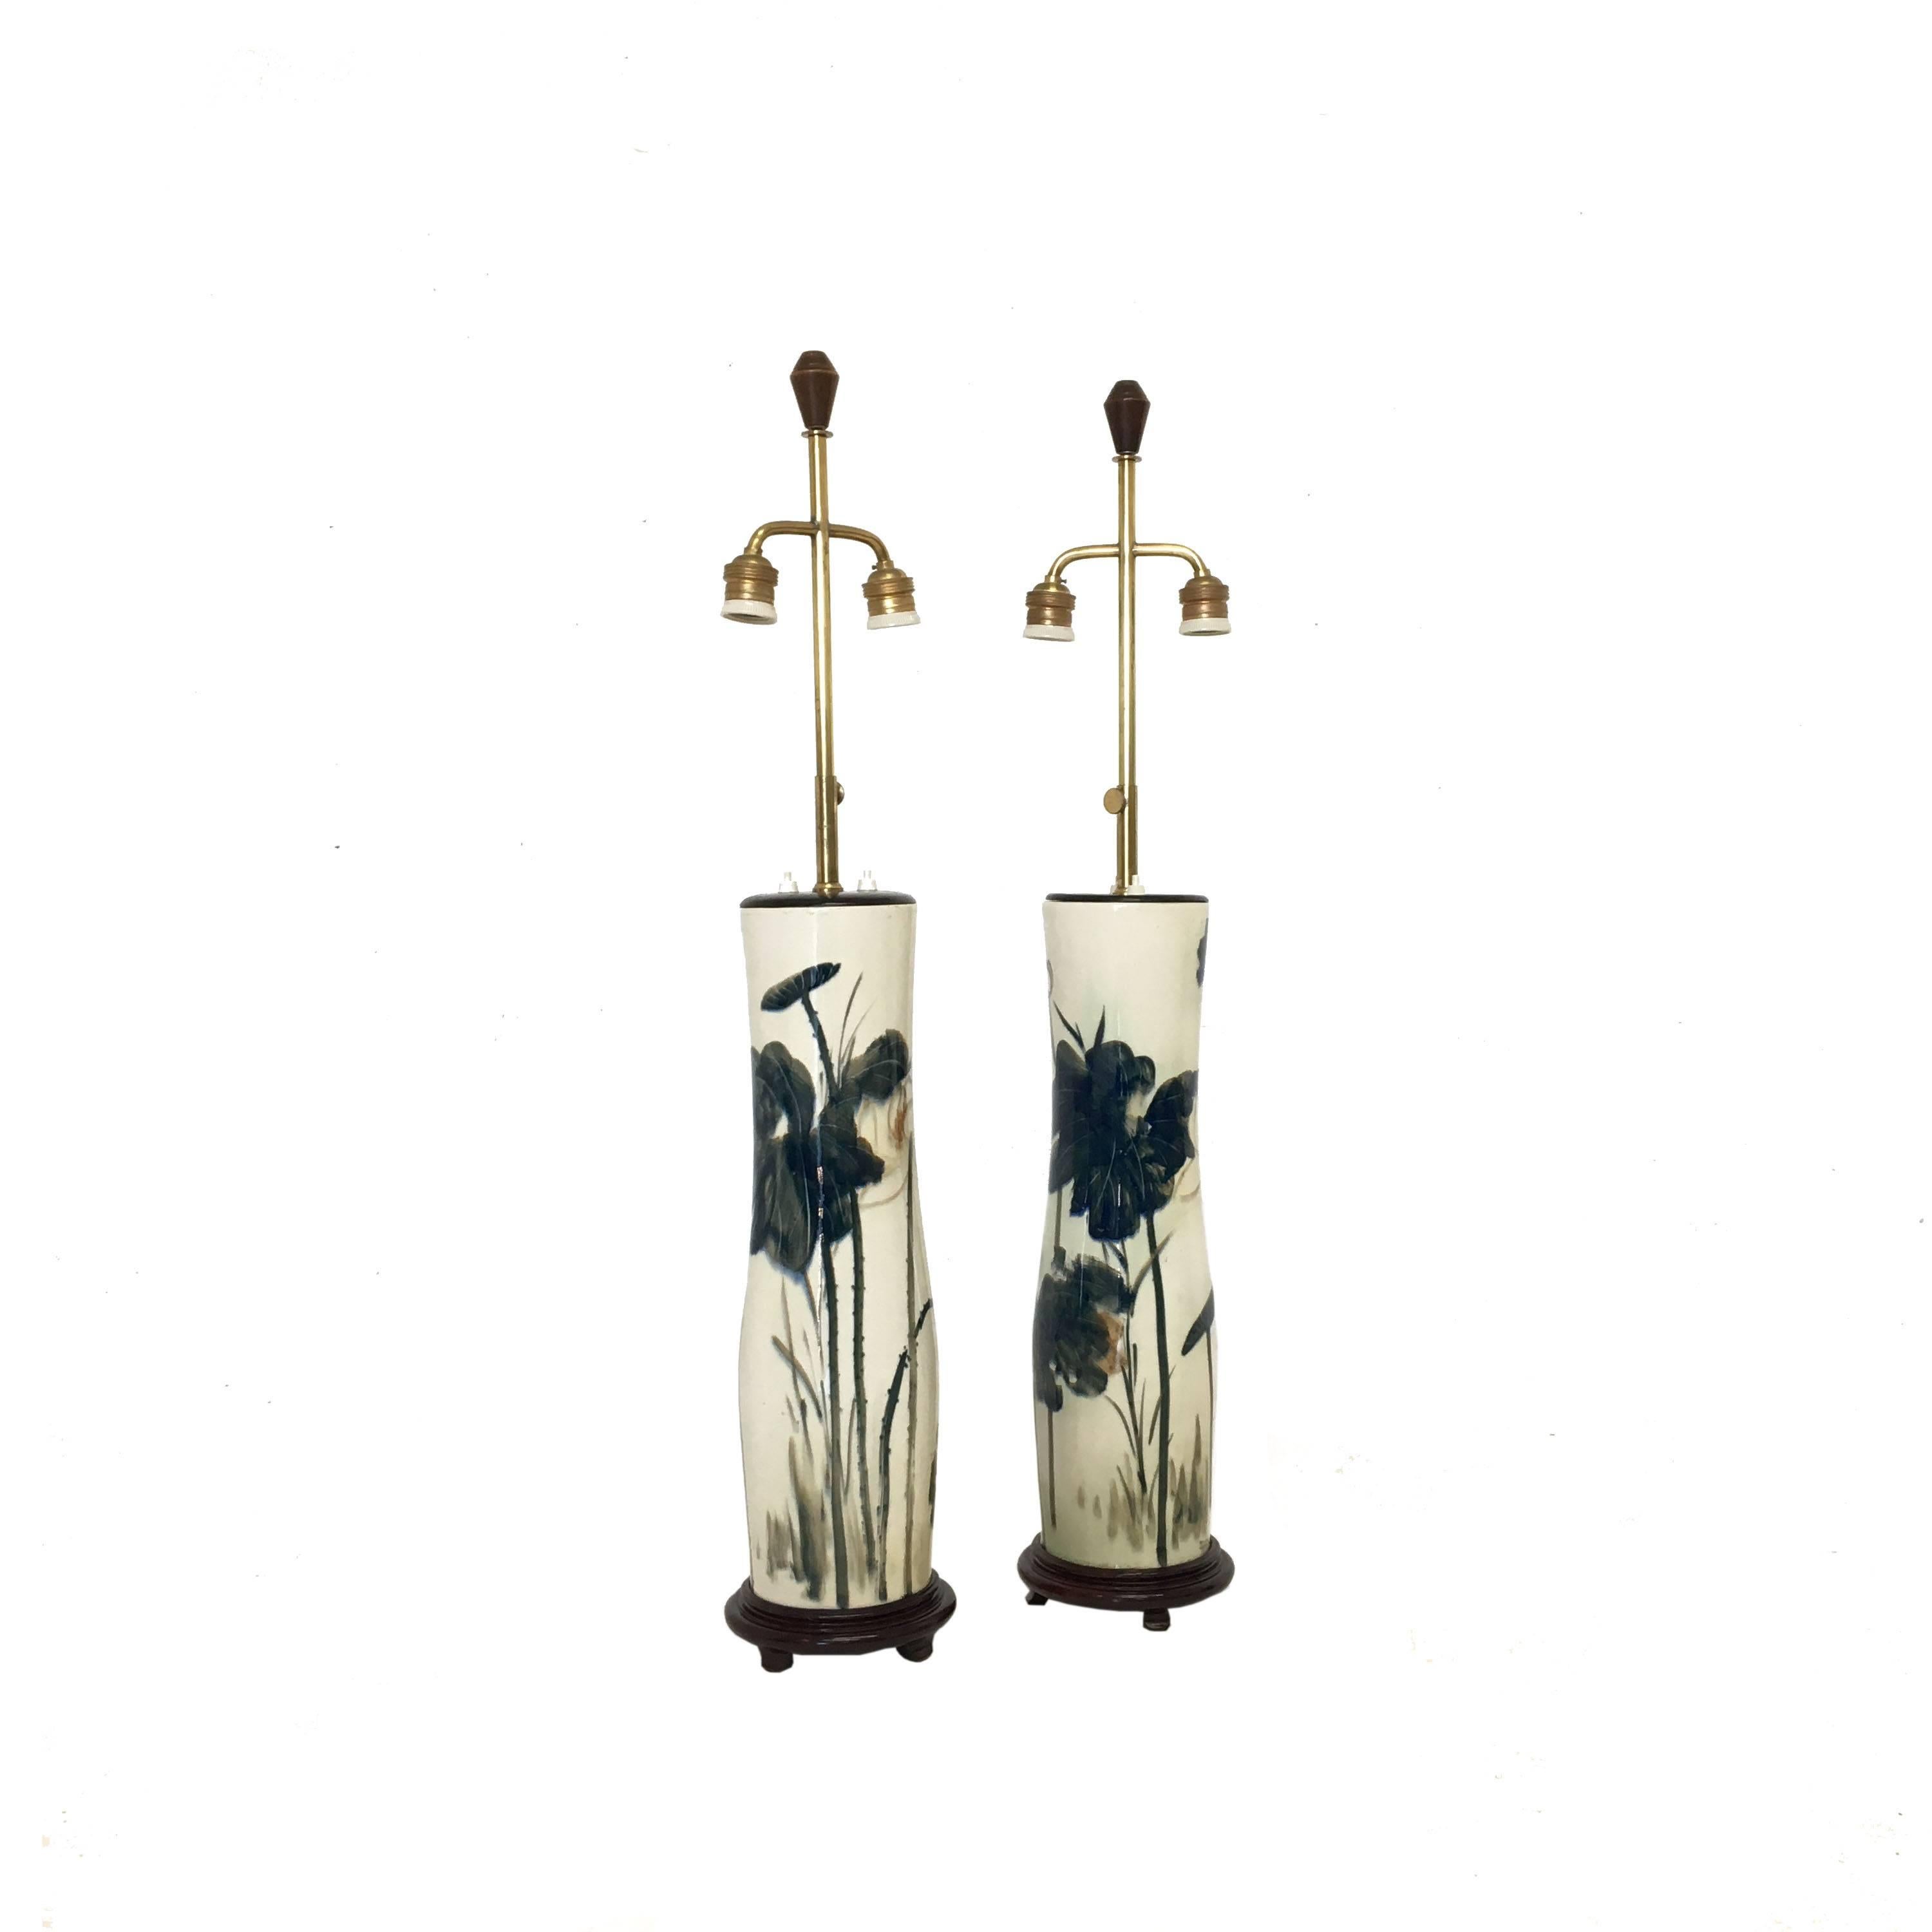 Pair of French Chinoiserie style hand-painted porcelain lamps. Chinoiserie botanical scene. Wonderfully decorated. The whole supported on a round wooden base. Shades included.
Age appropriate wear. One lamp has a hairline crack as depicted in